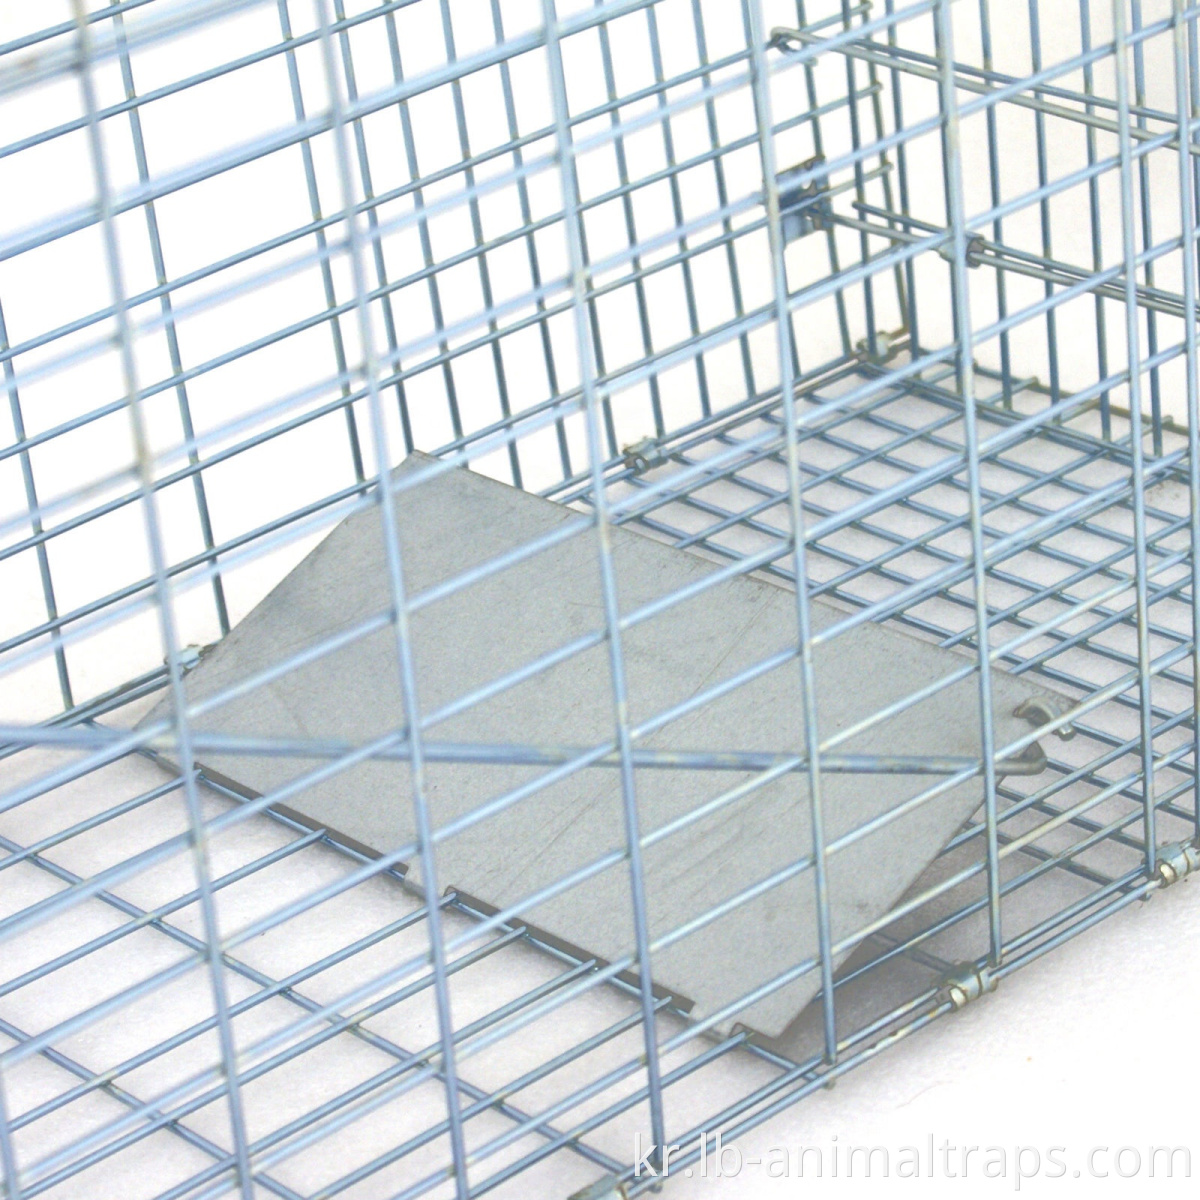 Hot Sale Liebang Marten Trap Cages for Sale Factory Supply